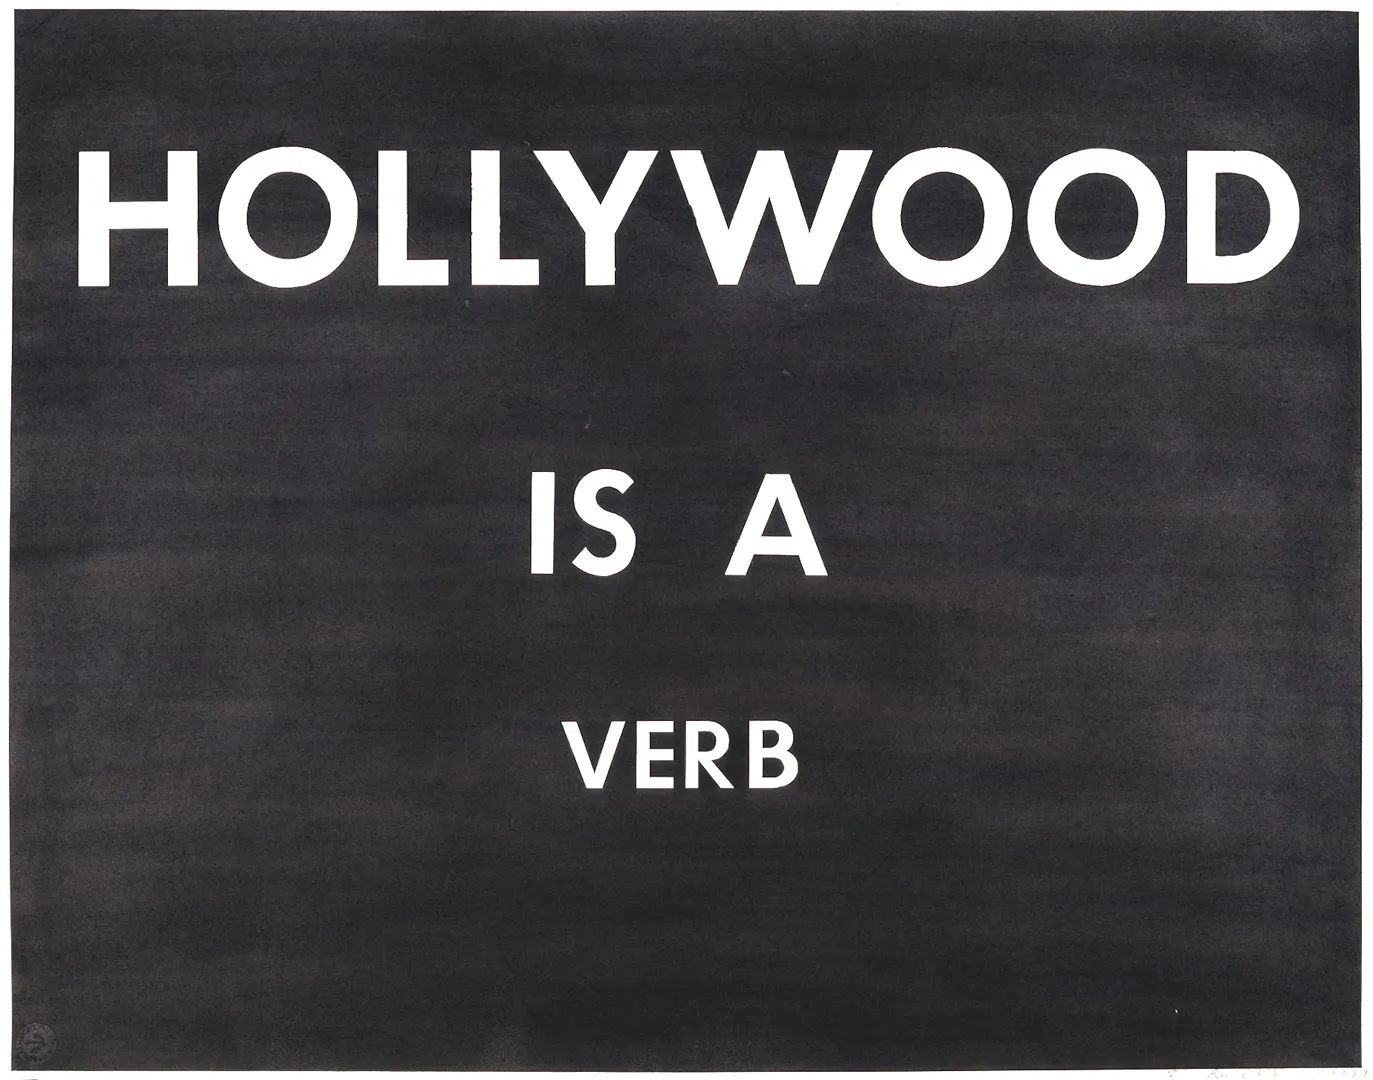 Ed Ruscha - HOLLYWOOD IS A VERB, 1979, pastel on paper